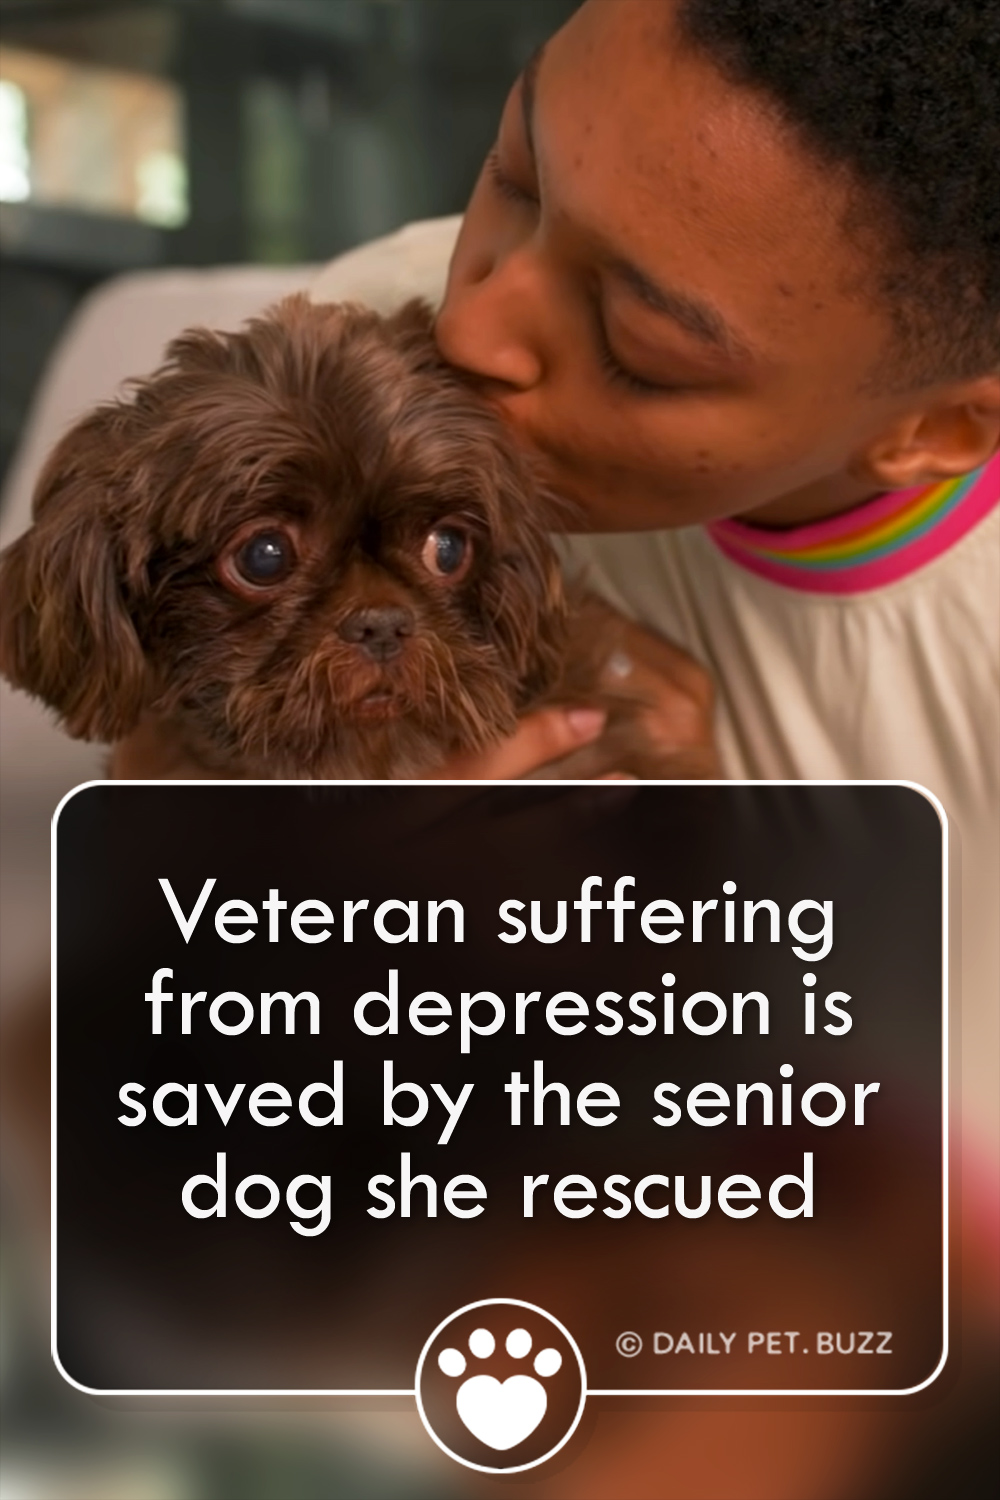 Veteran suffering from depression is saved by the senior dog she rescued